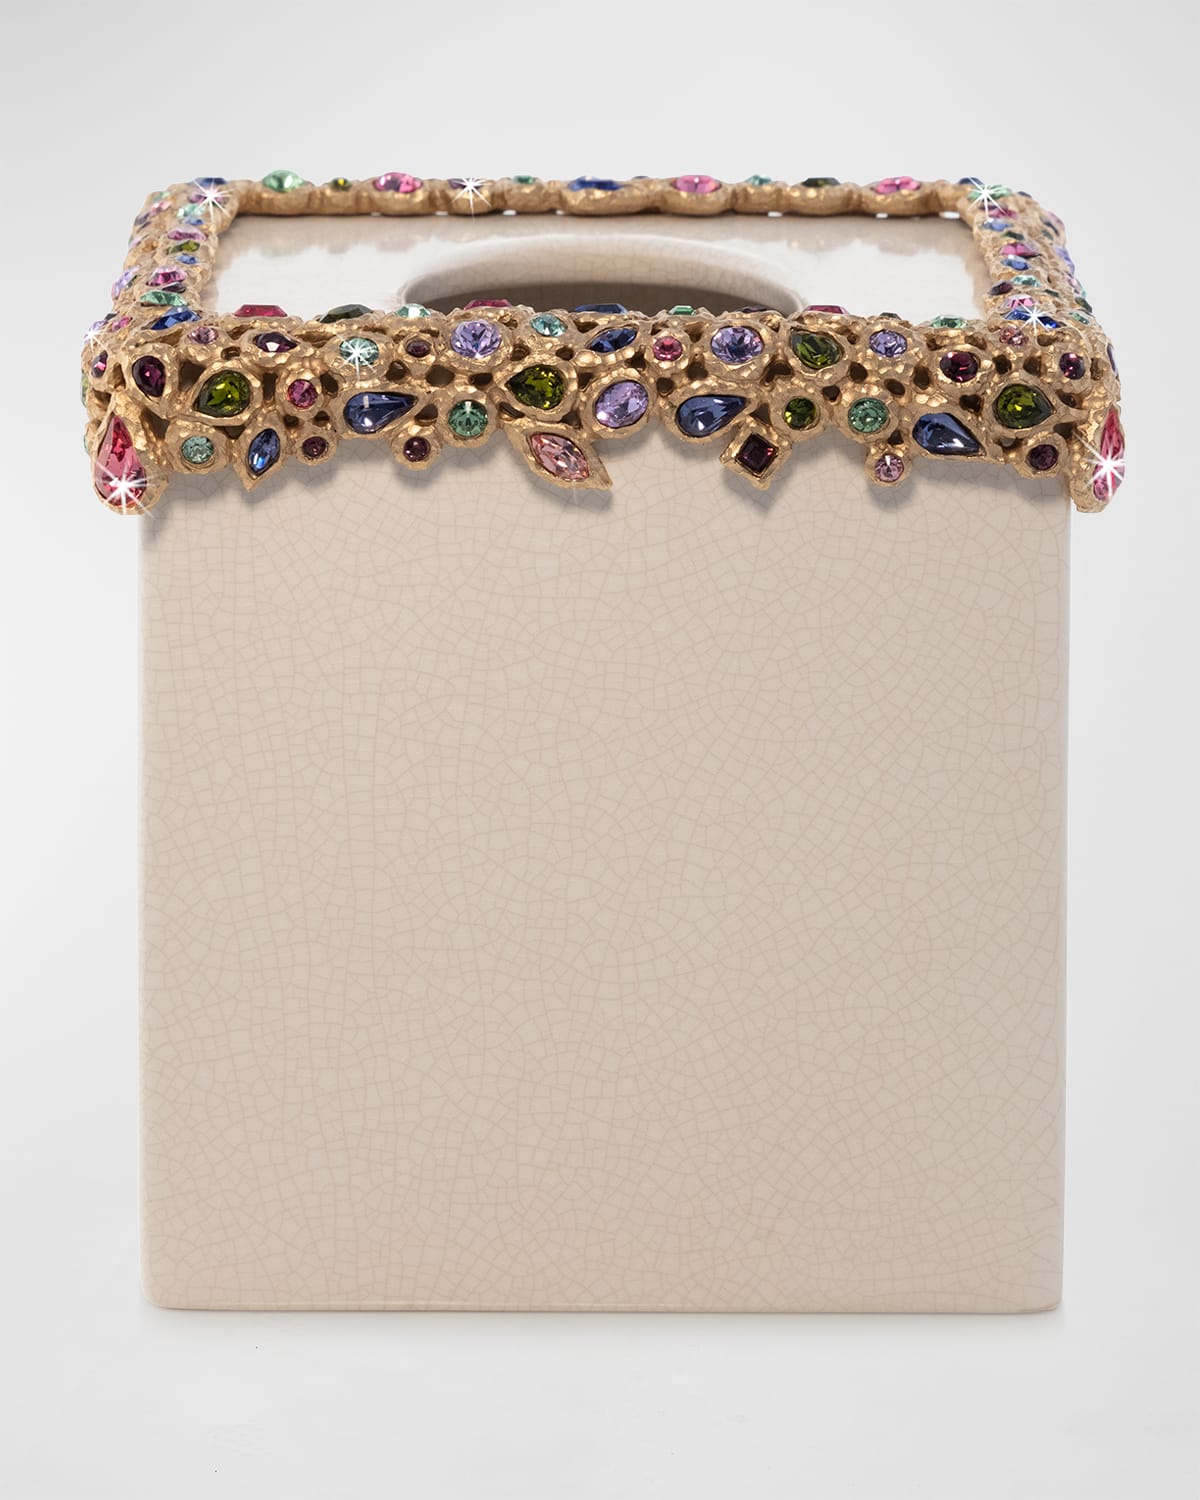 JAY STRONGWATER BEJEWELED TISSUE BOX